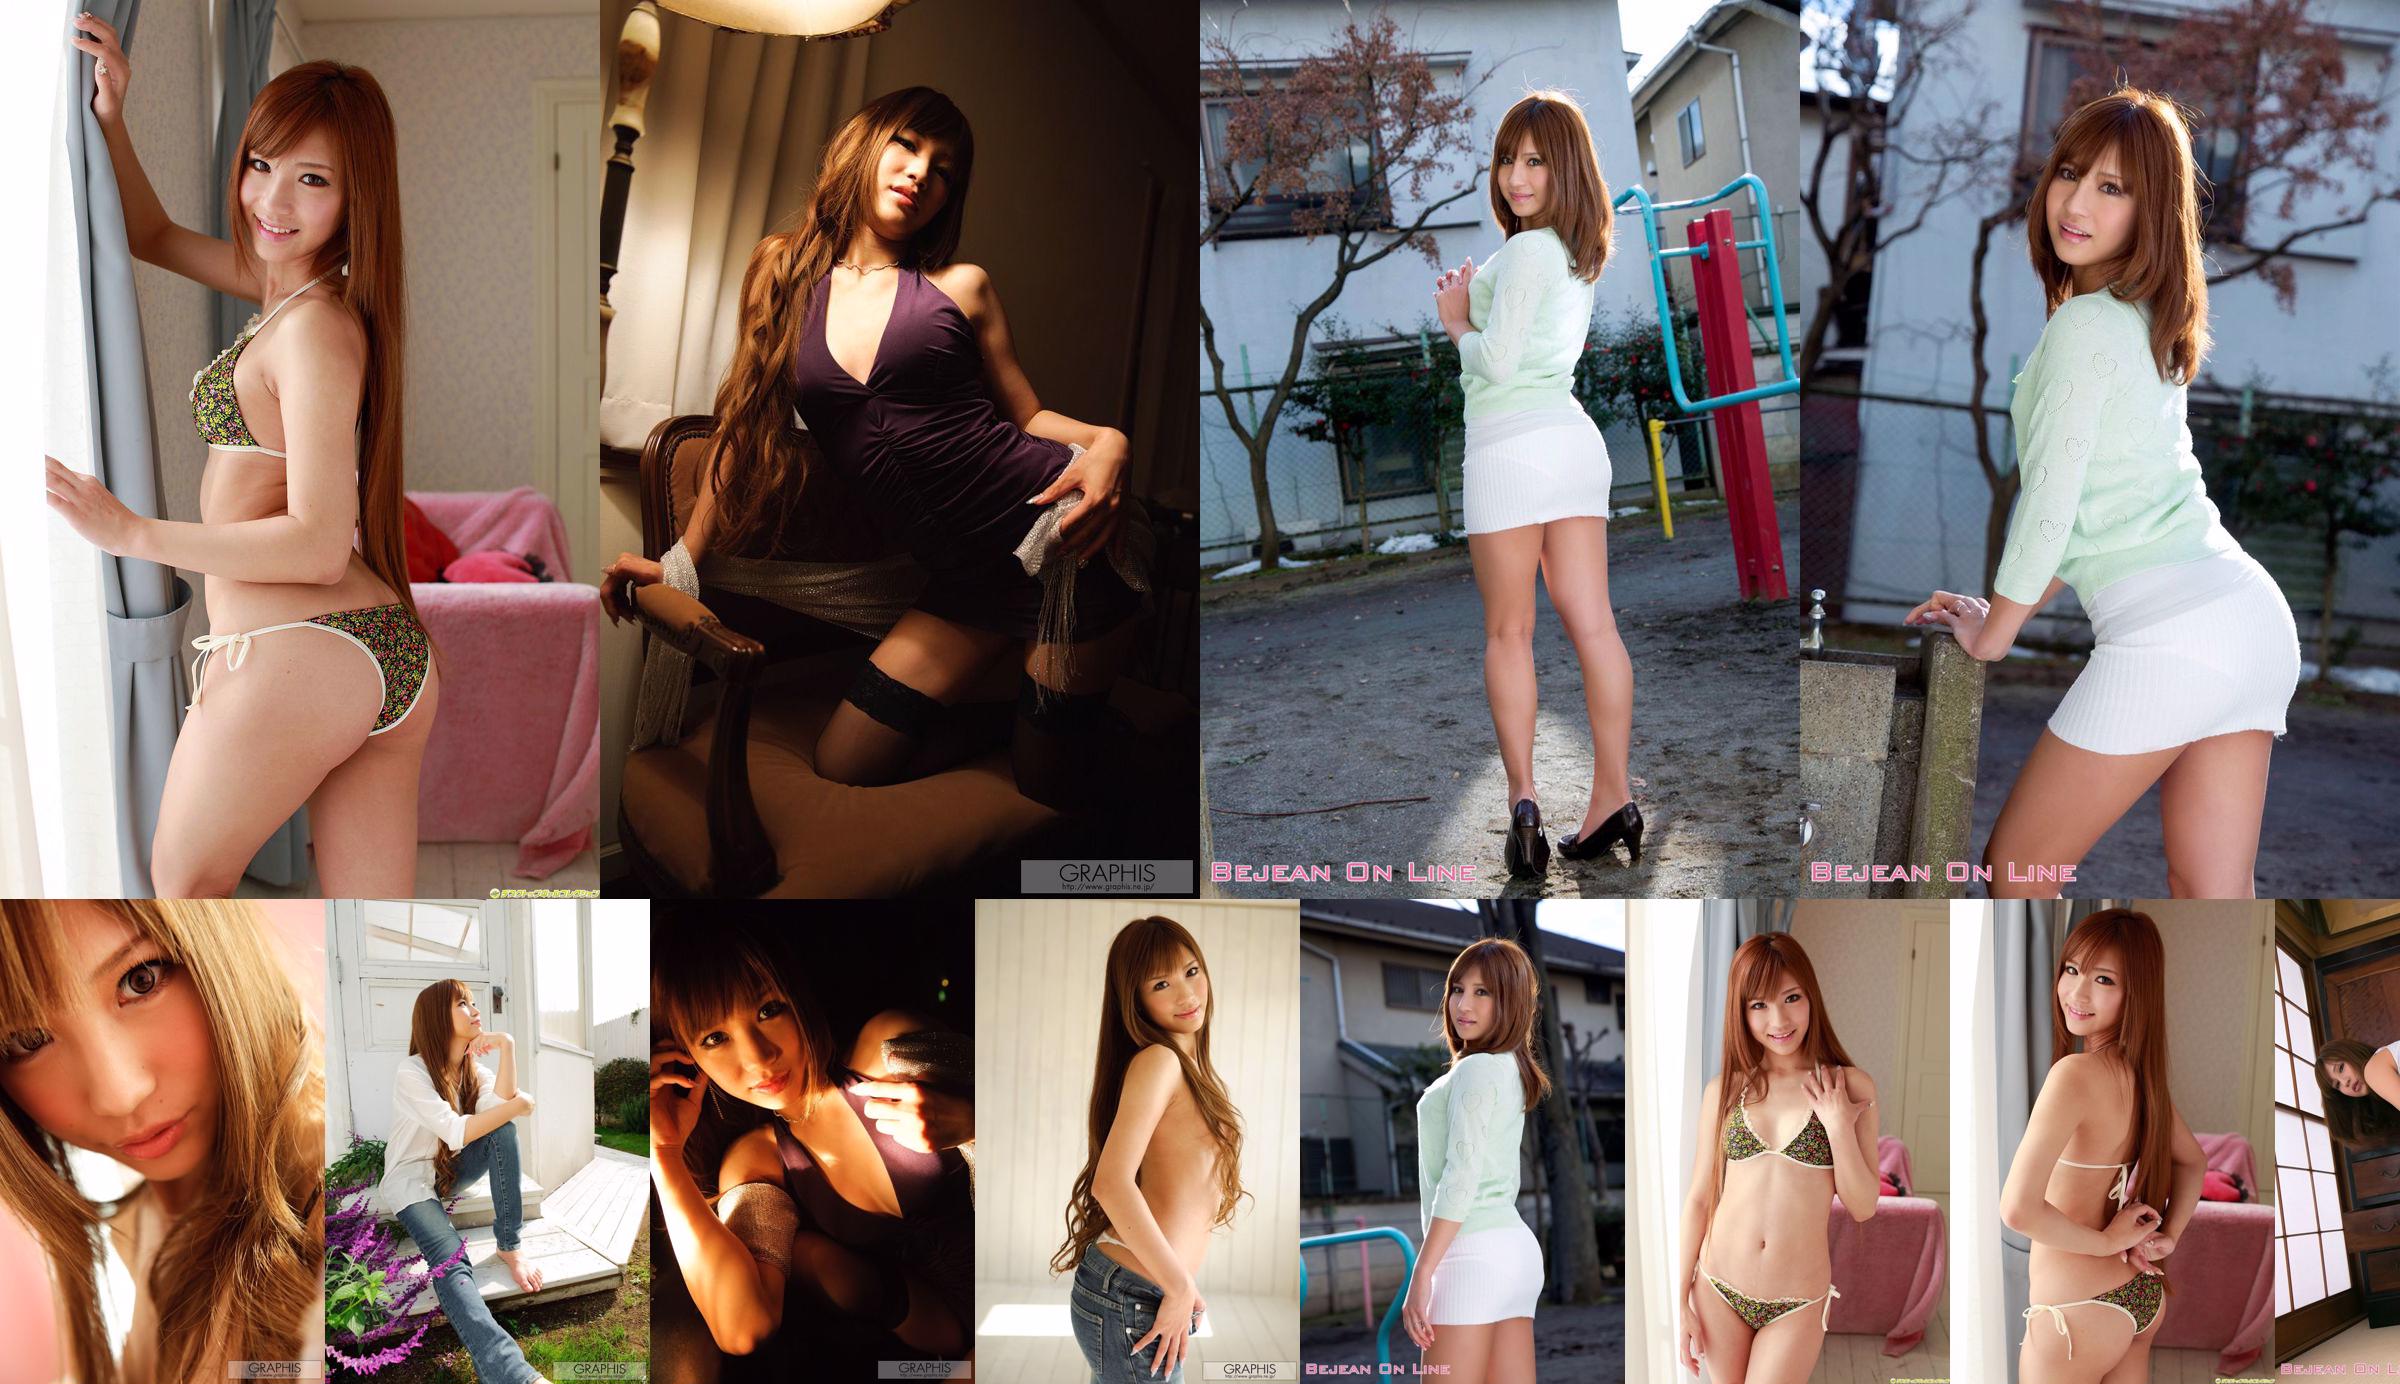 Special Special Gravure Anna Anjou Anna Anjo [Bejean On Line] No.520f17 Pagina 11